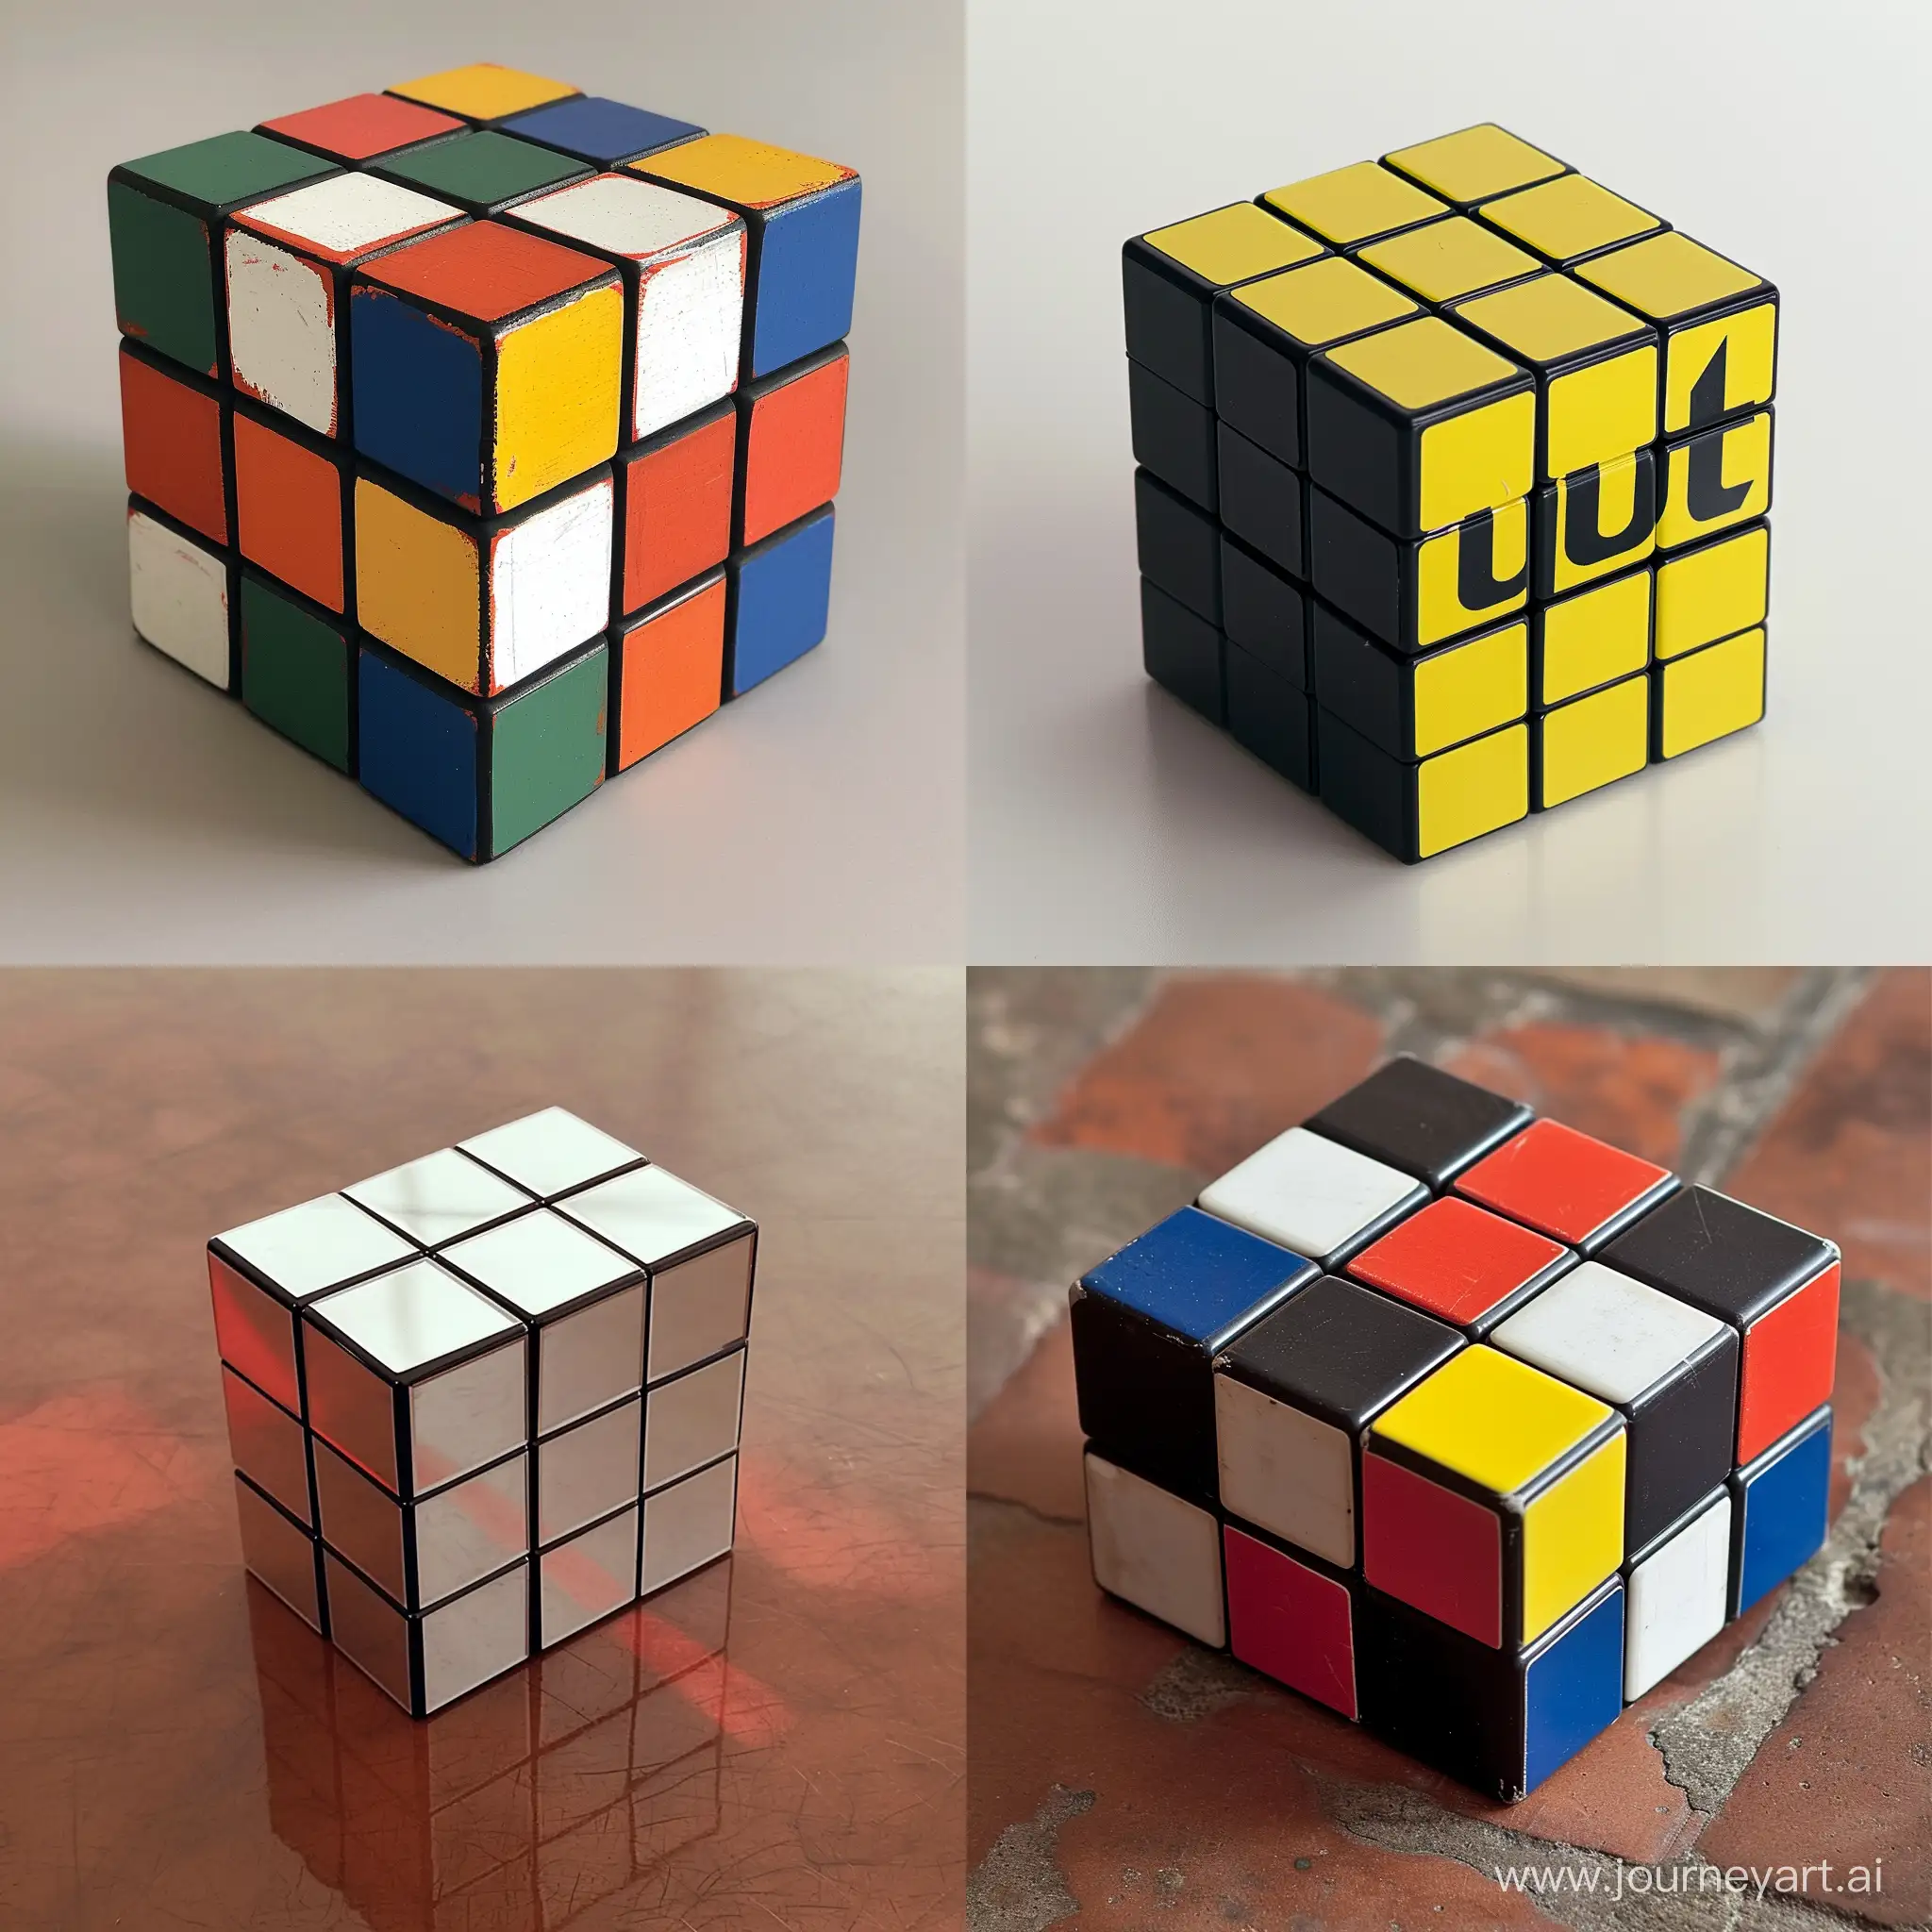 Cube-Lesson-Video-Exploring-3D-Art-in-a-Square-Frame